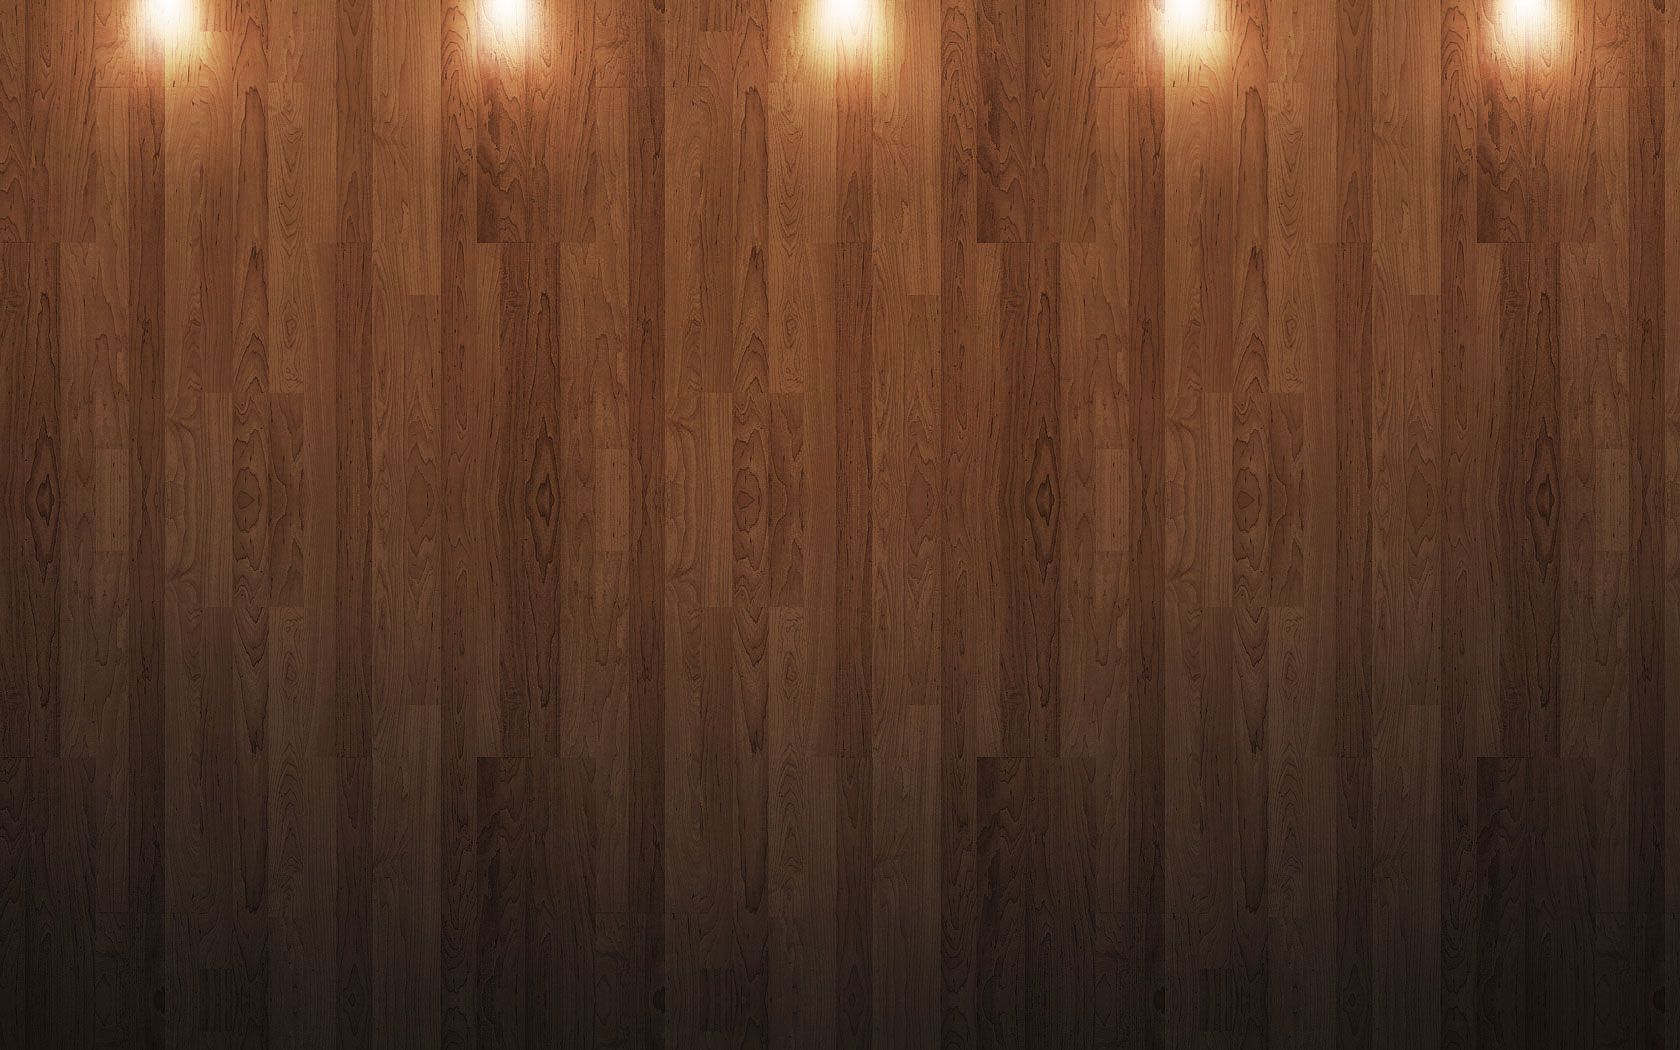 Full HD Wallpapers + Backgrounds, Wood, Spotlights, Brown, by ...